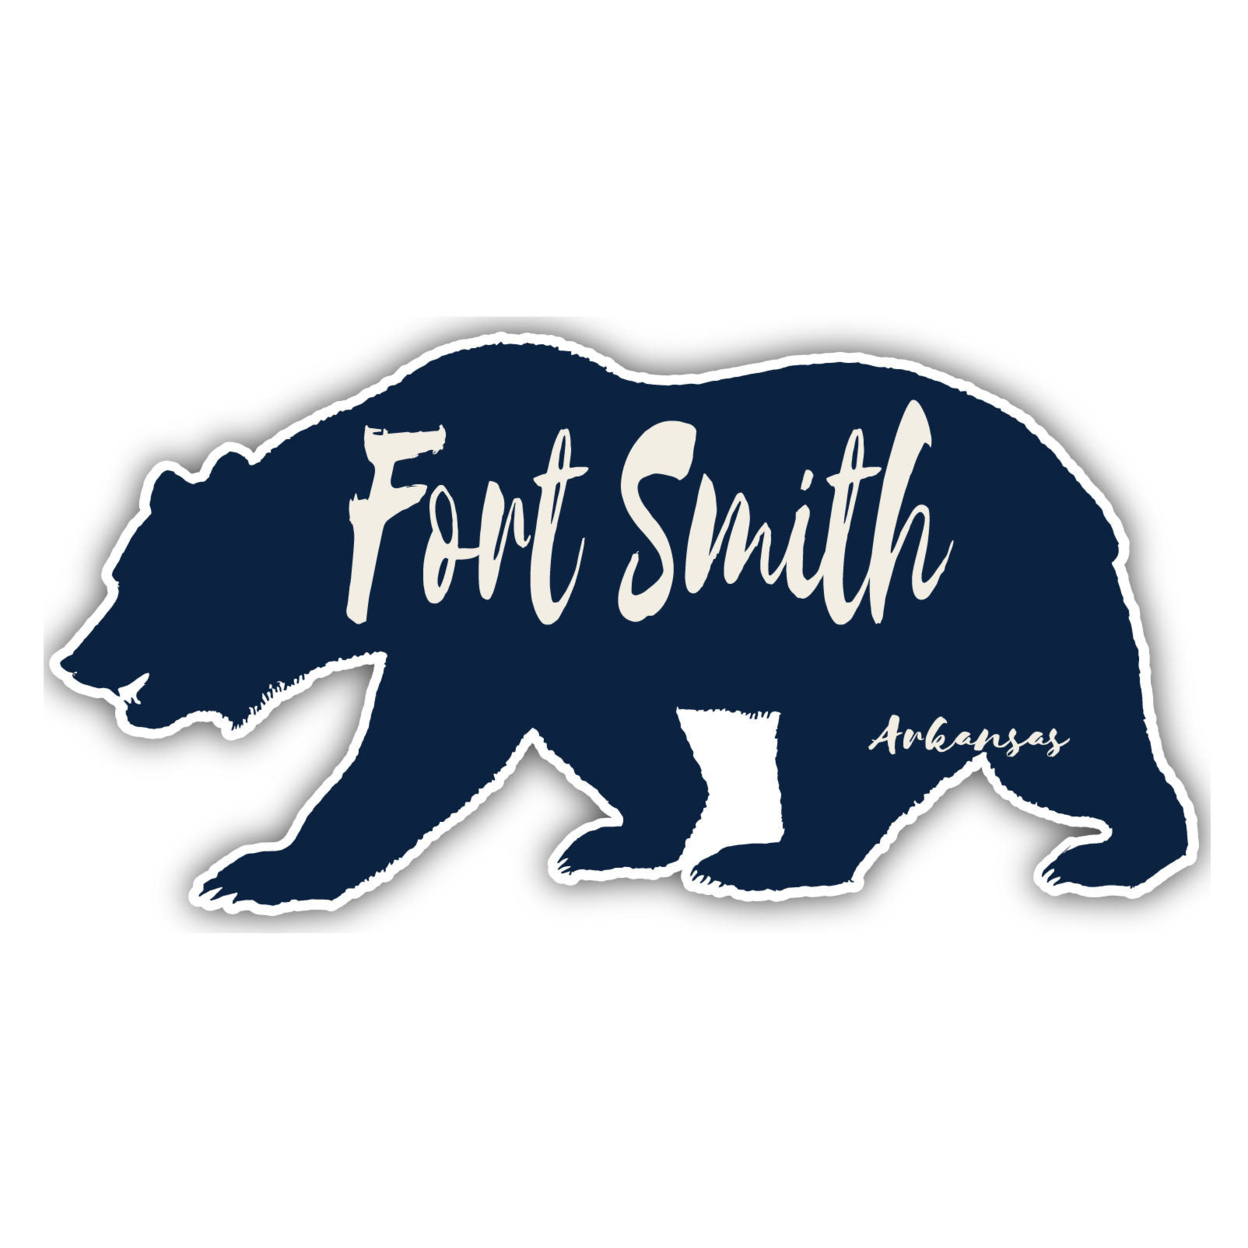 Fort Smith Arkansas Souvenir Decorative Stickers (Choose Theme And Size) - 4-Pack, 10-Inch, Bear